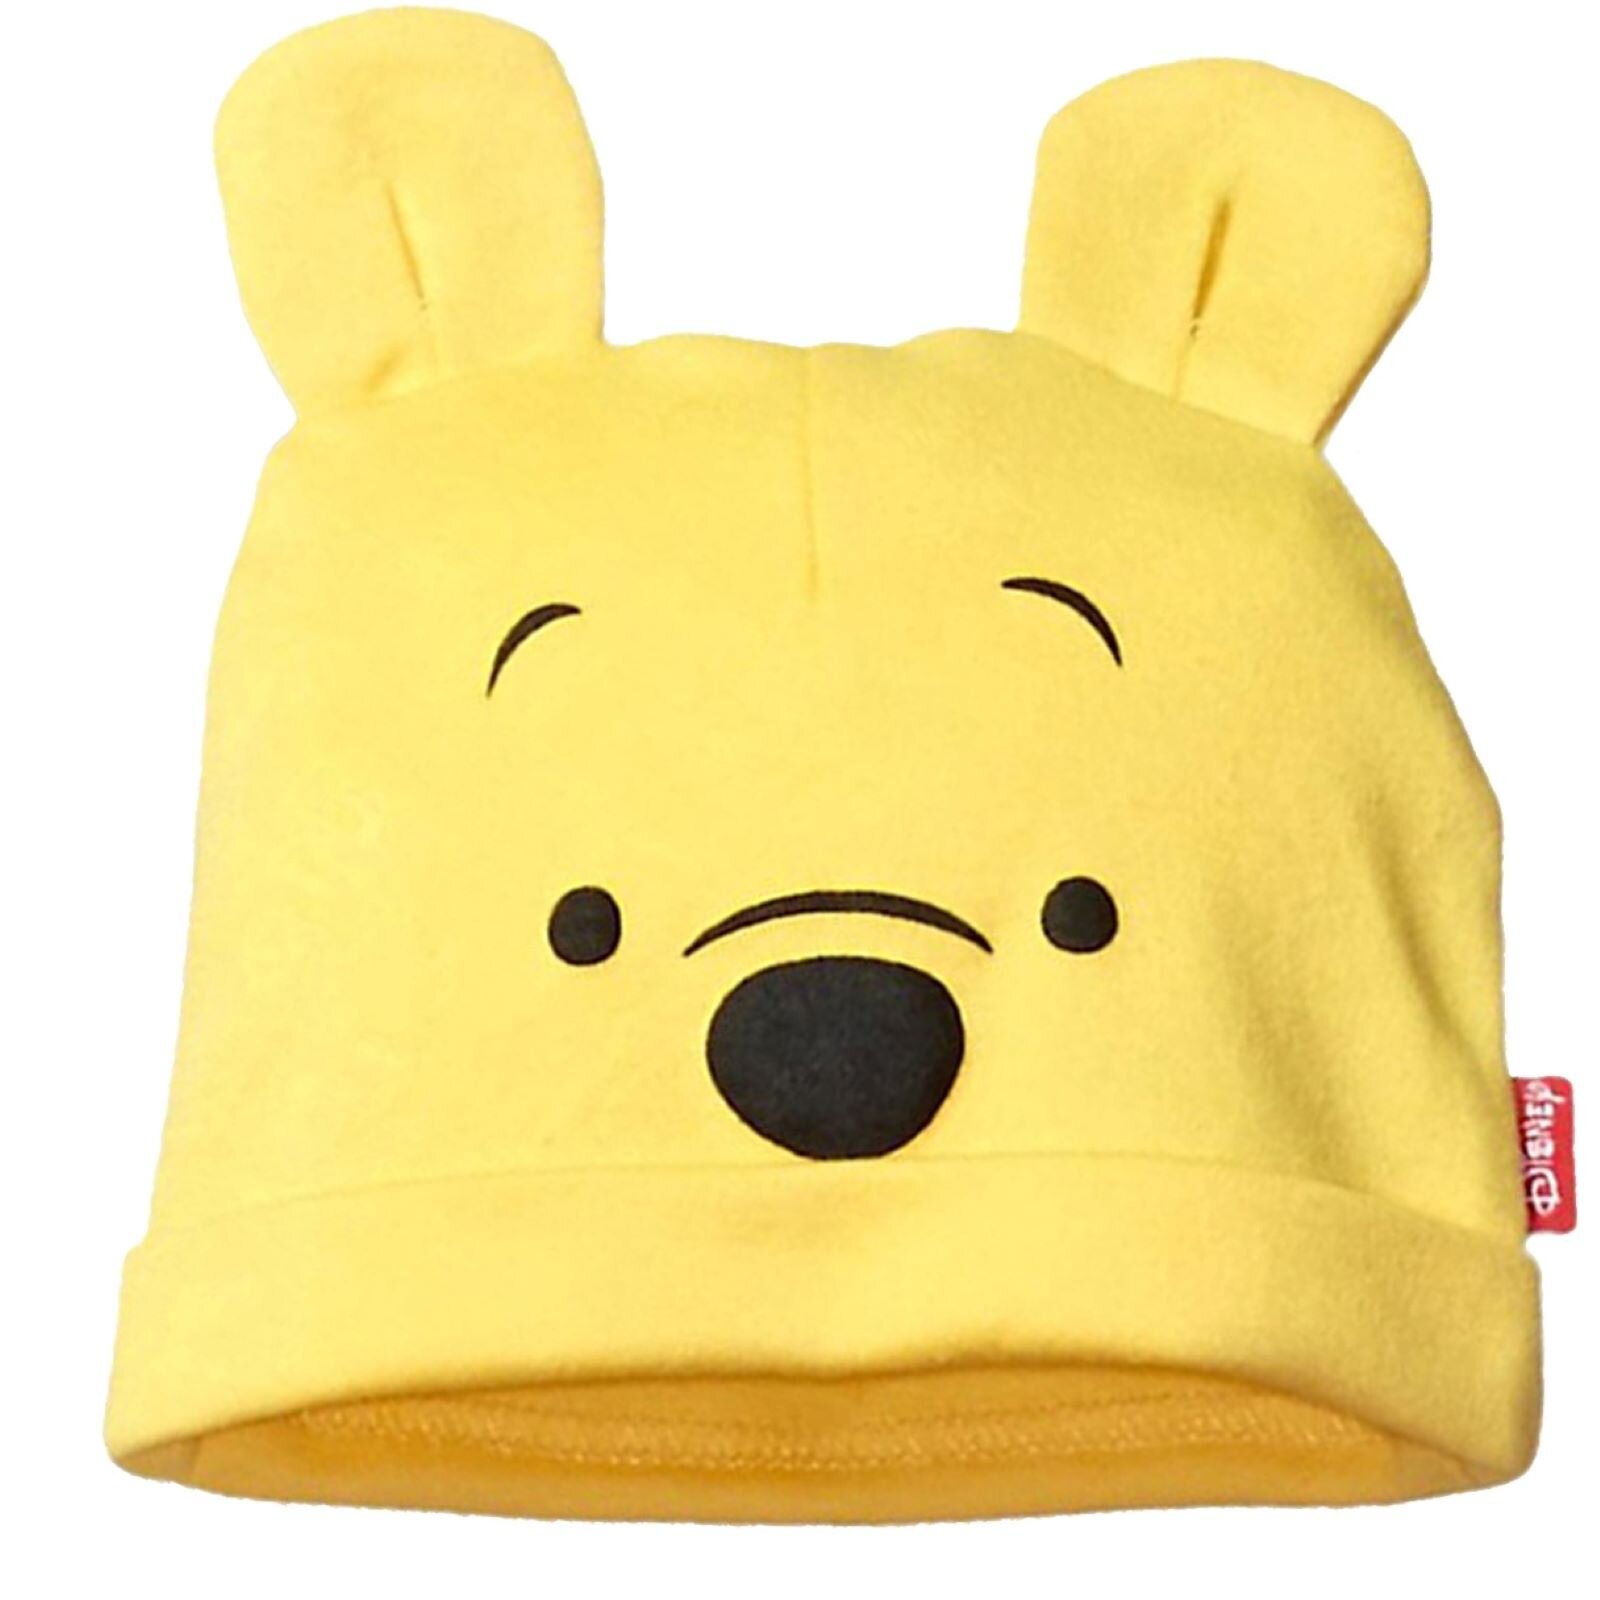 Disney Winnie the Pooh Infant Baby Boys Bodysuit and Hat Set Newborn to Infant - image 4 of 5